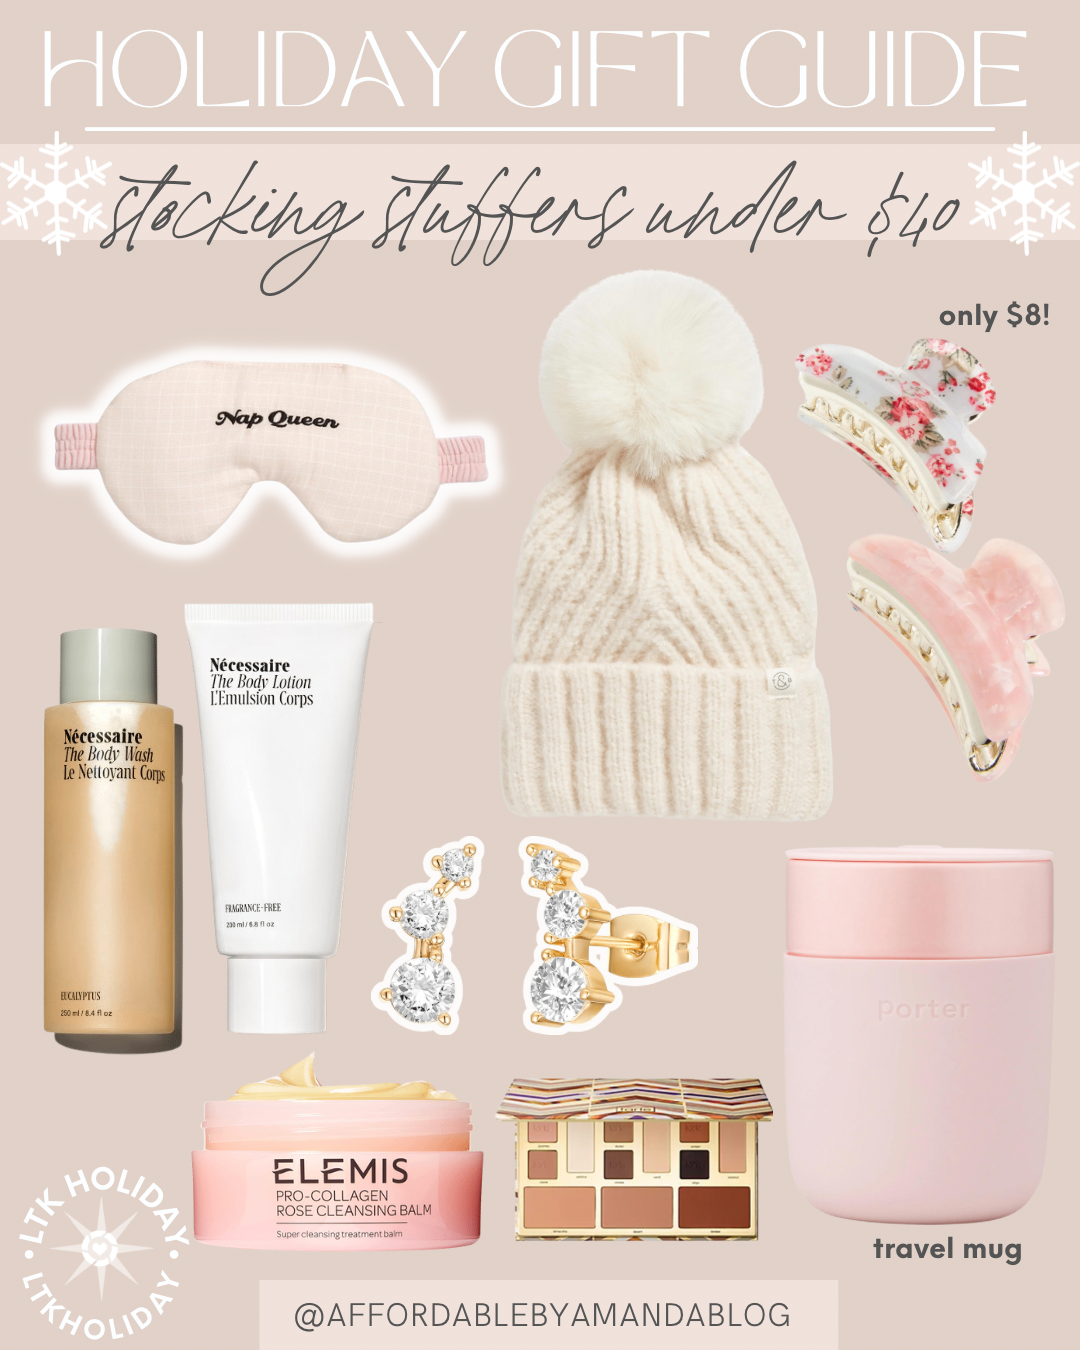 Holiday Gift Guide Best Stocking Stuffers for Women 2021 - Affordable by Amanda